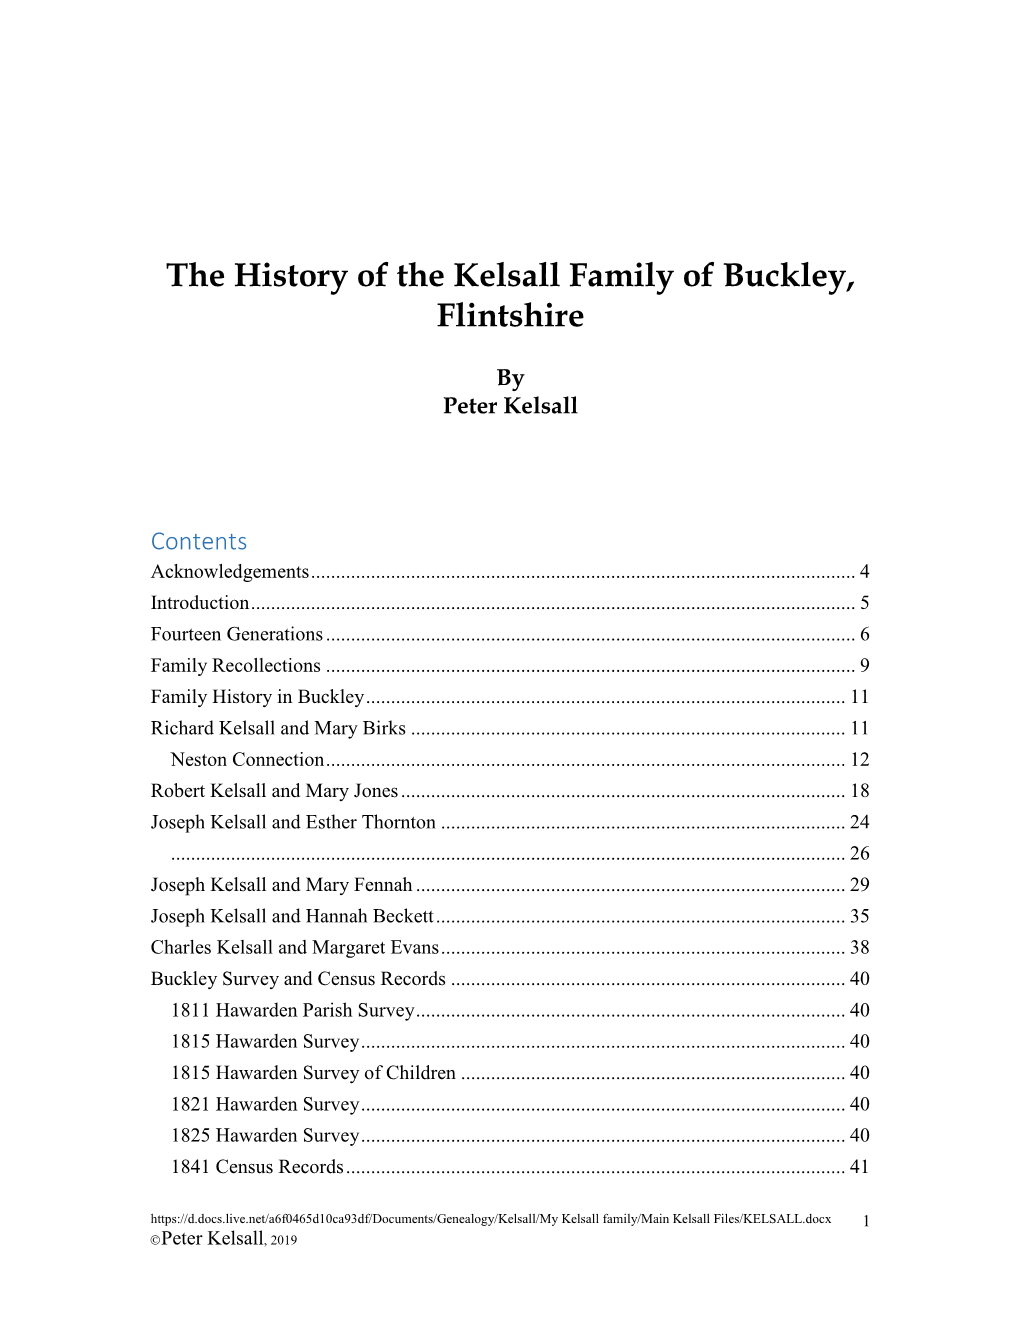 The History of the Kelsall Family of Buckley, Flintshire